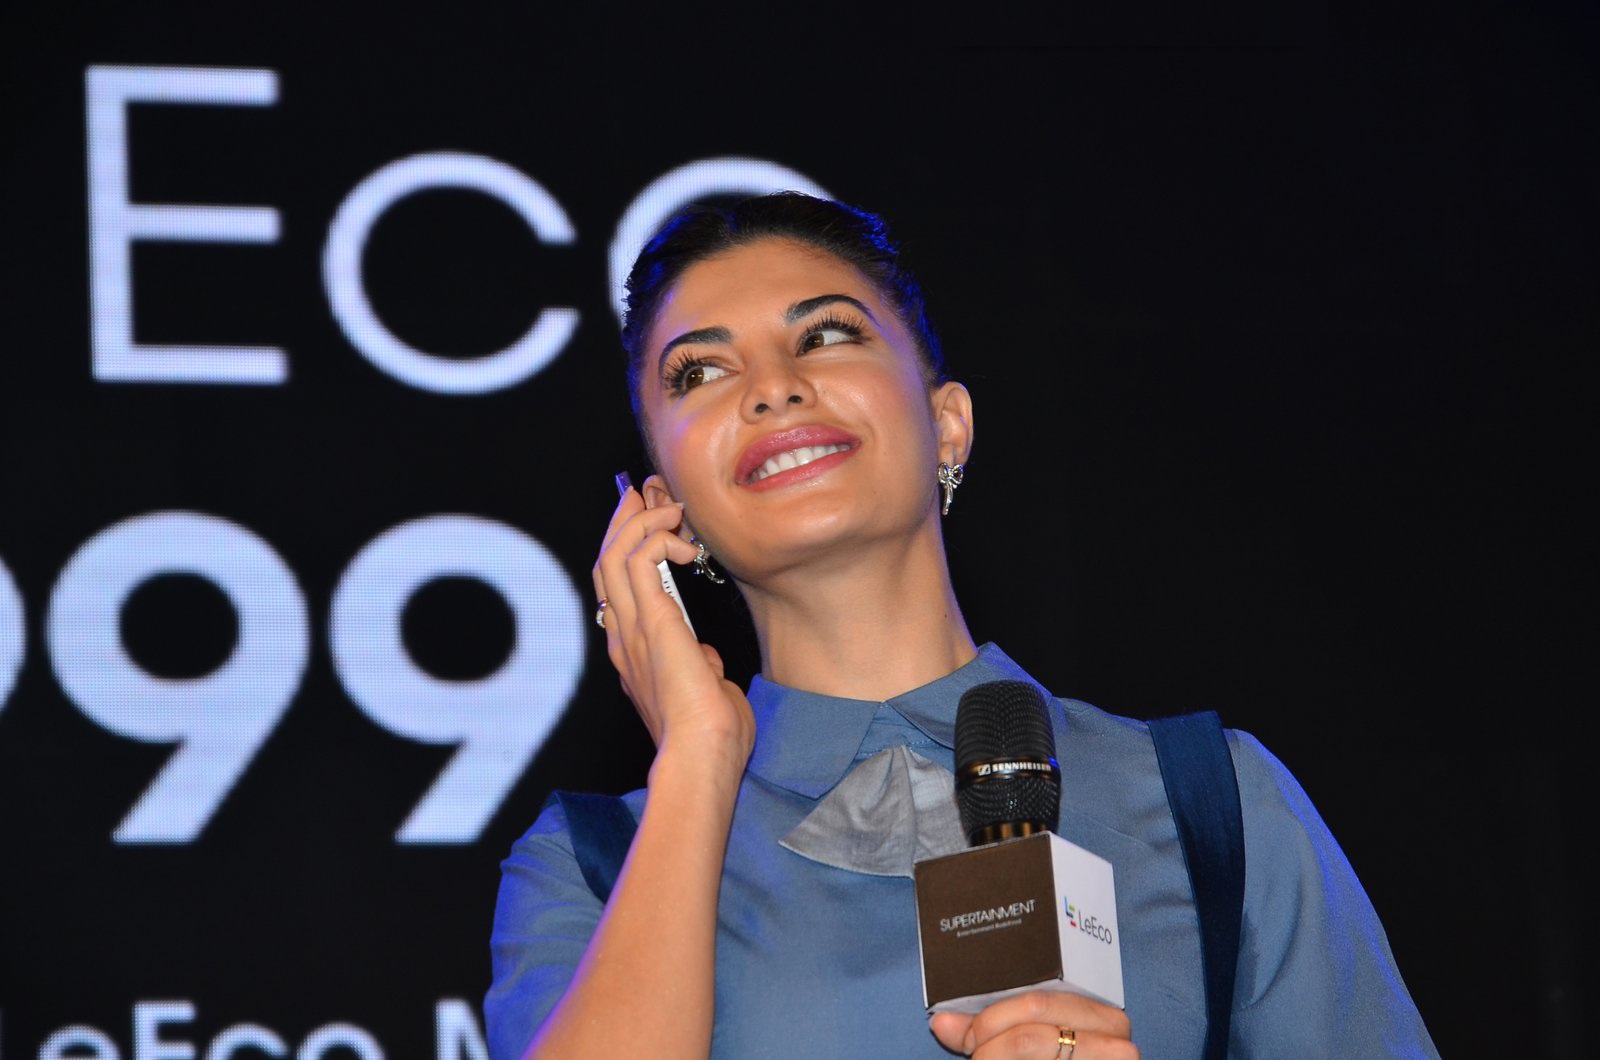 Jacqueline Fernandez Looks Smoking Hot At The Launch Event of LeEco Smartphones In Mumbai